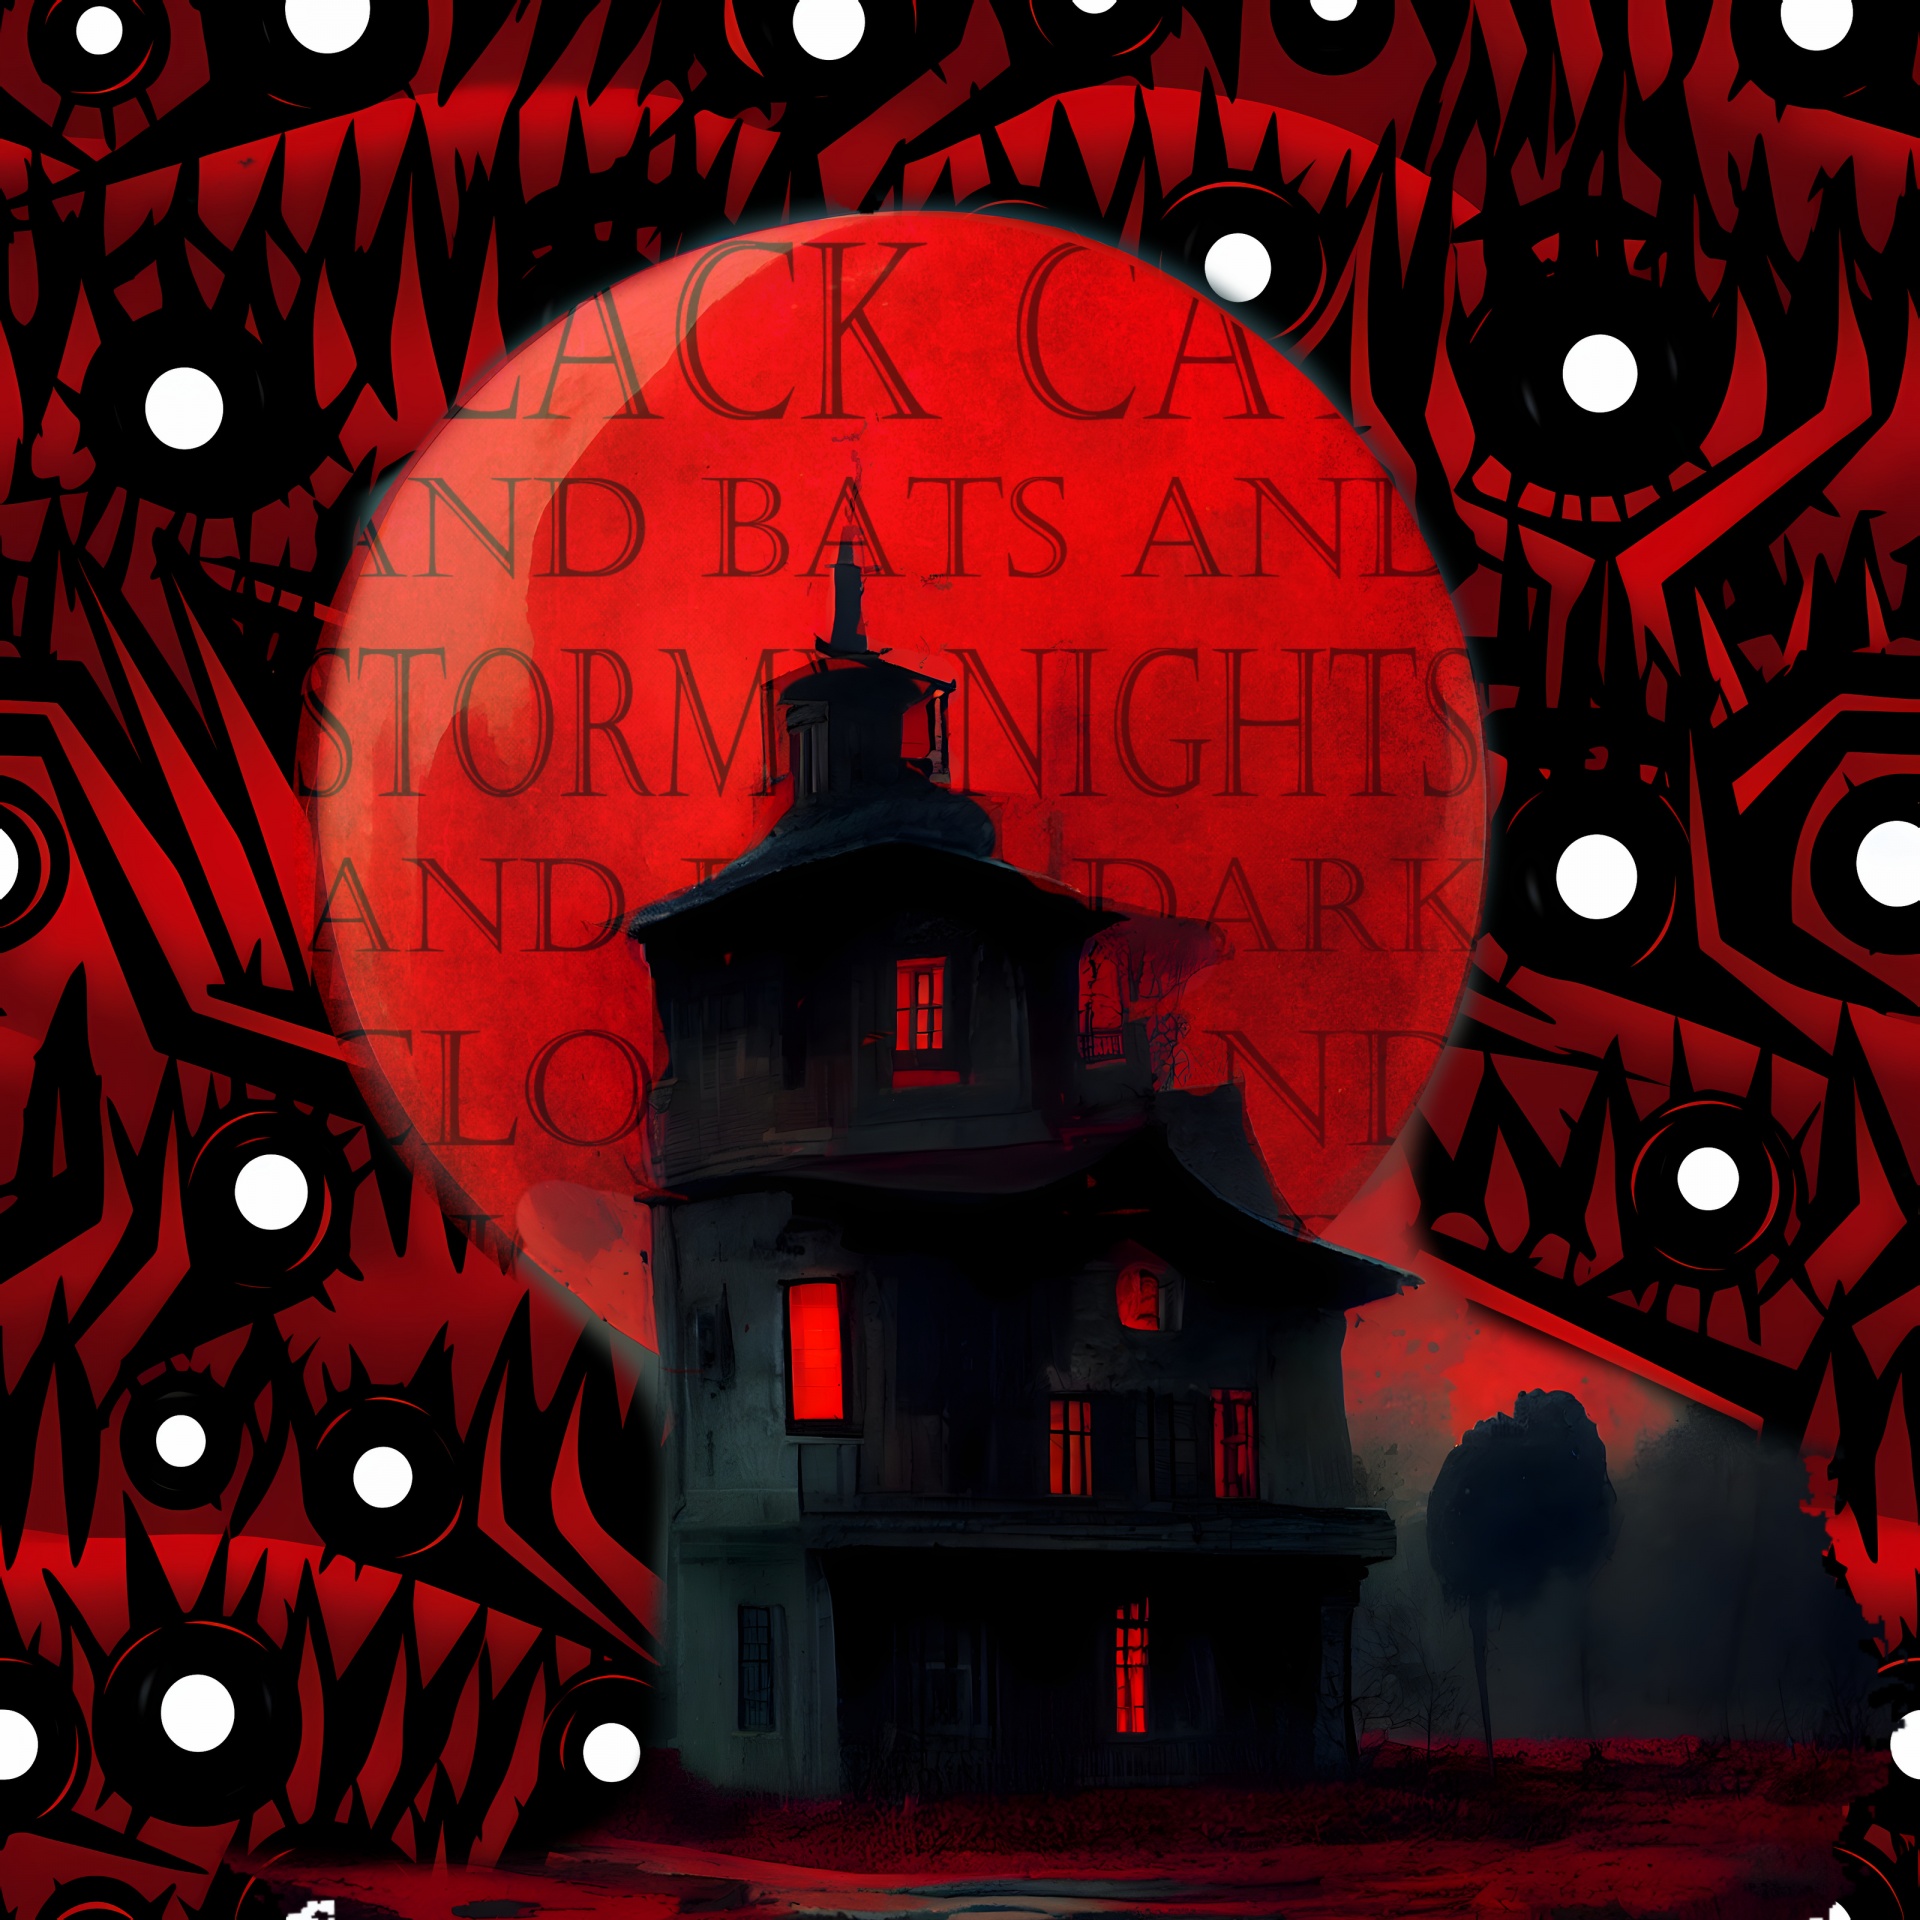 Cartoon type illustration featuring a haunted house on a background of eyes